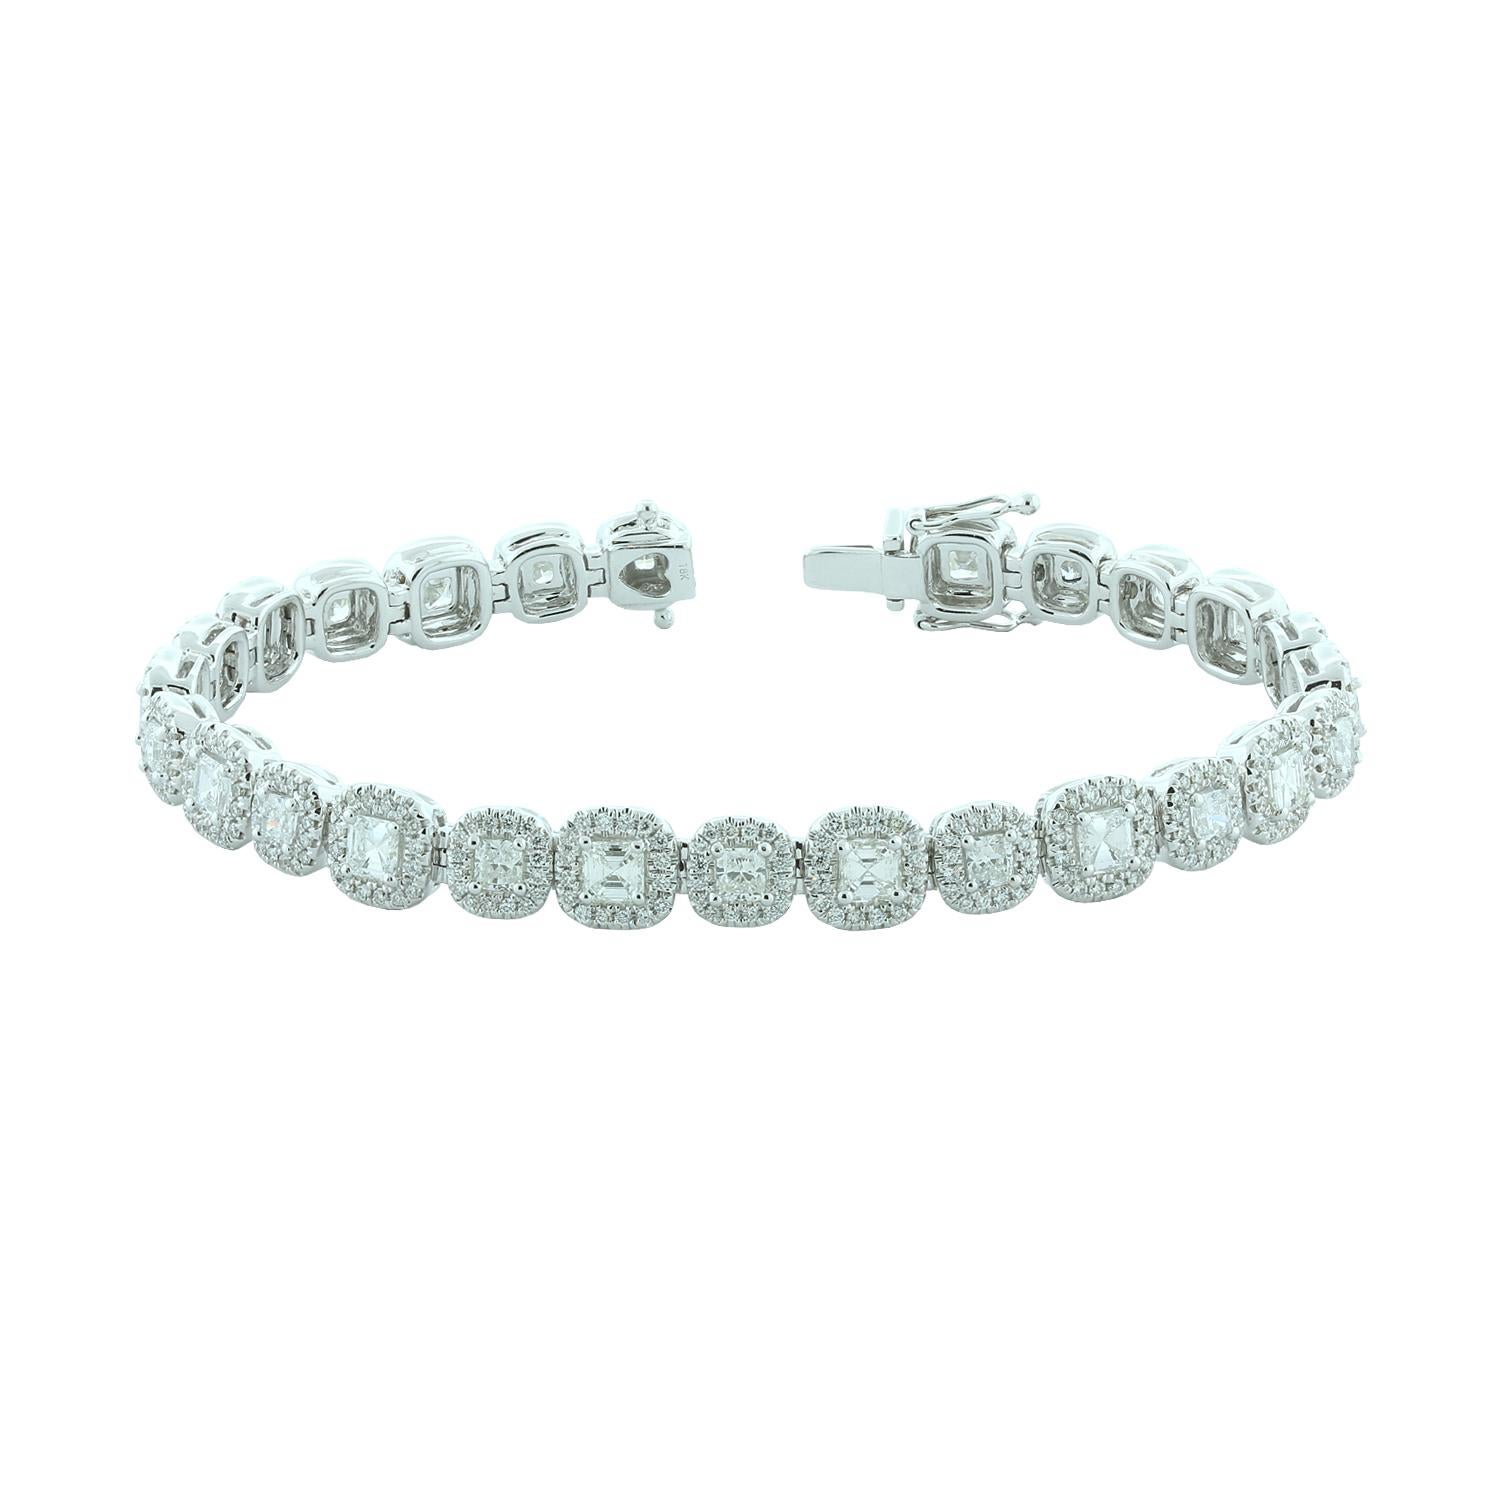 An exceptional bracelet featuring 4.41 carats of sparkling white VS quality princess cut diamonds haloed by 1.65 carats of VVS quality round cut white diamonds. Set in 18K white gold with a box clasp and two safety latches.

Length: 7 inches